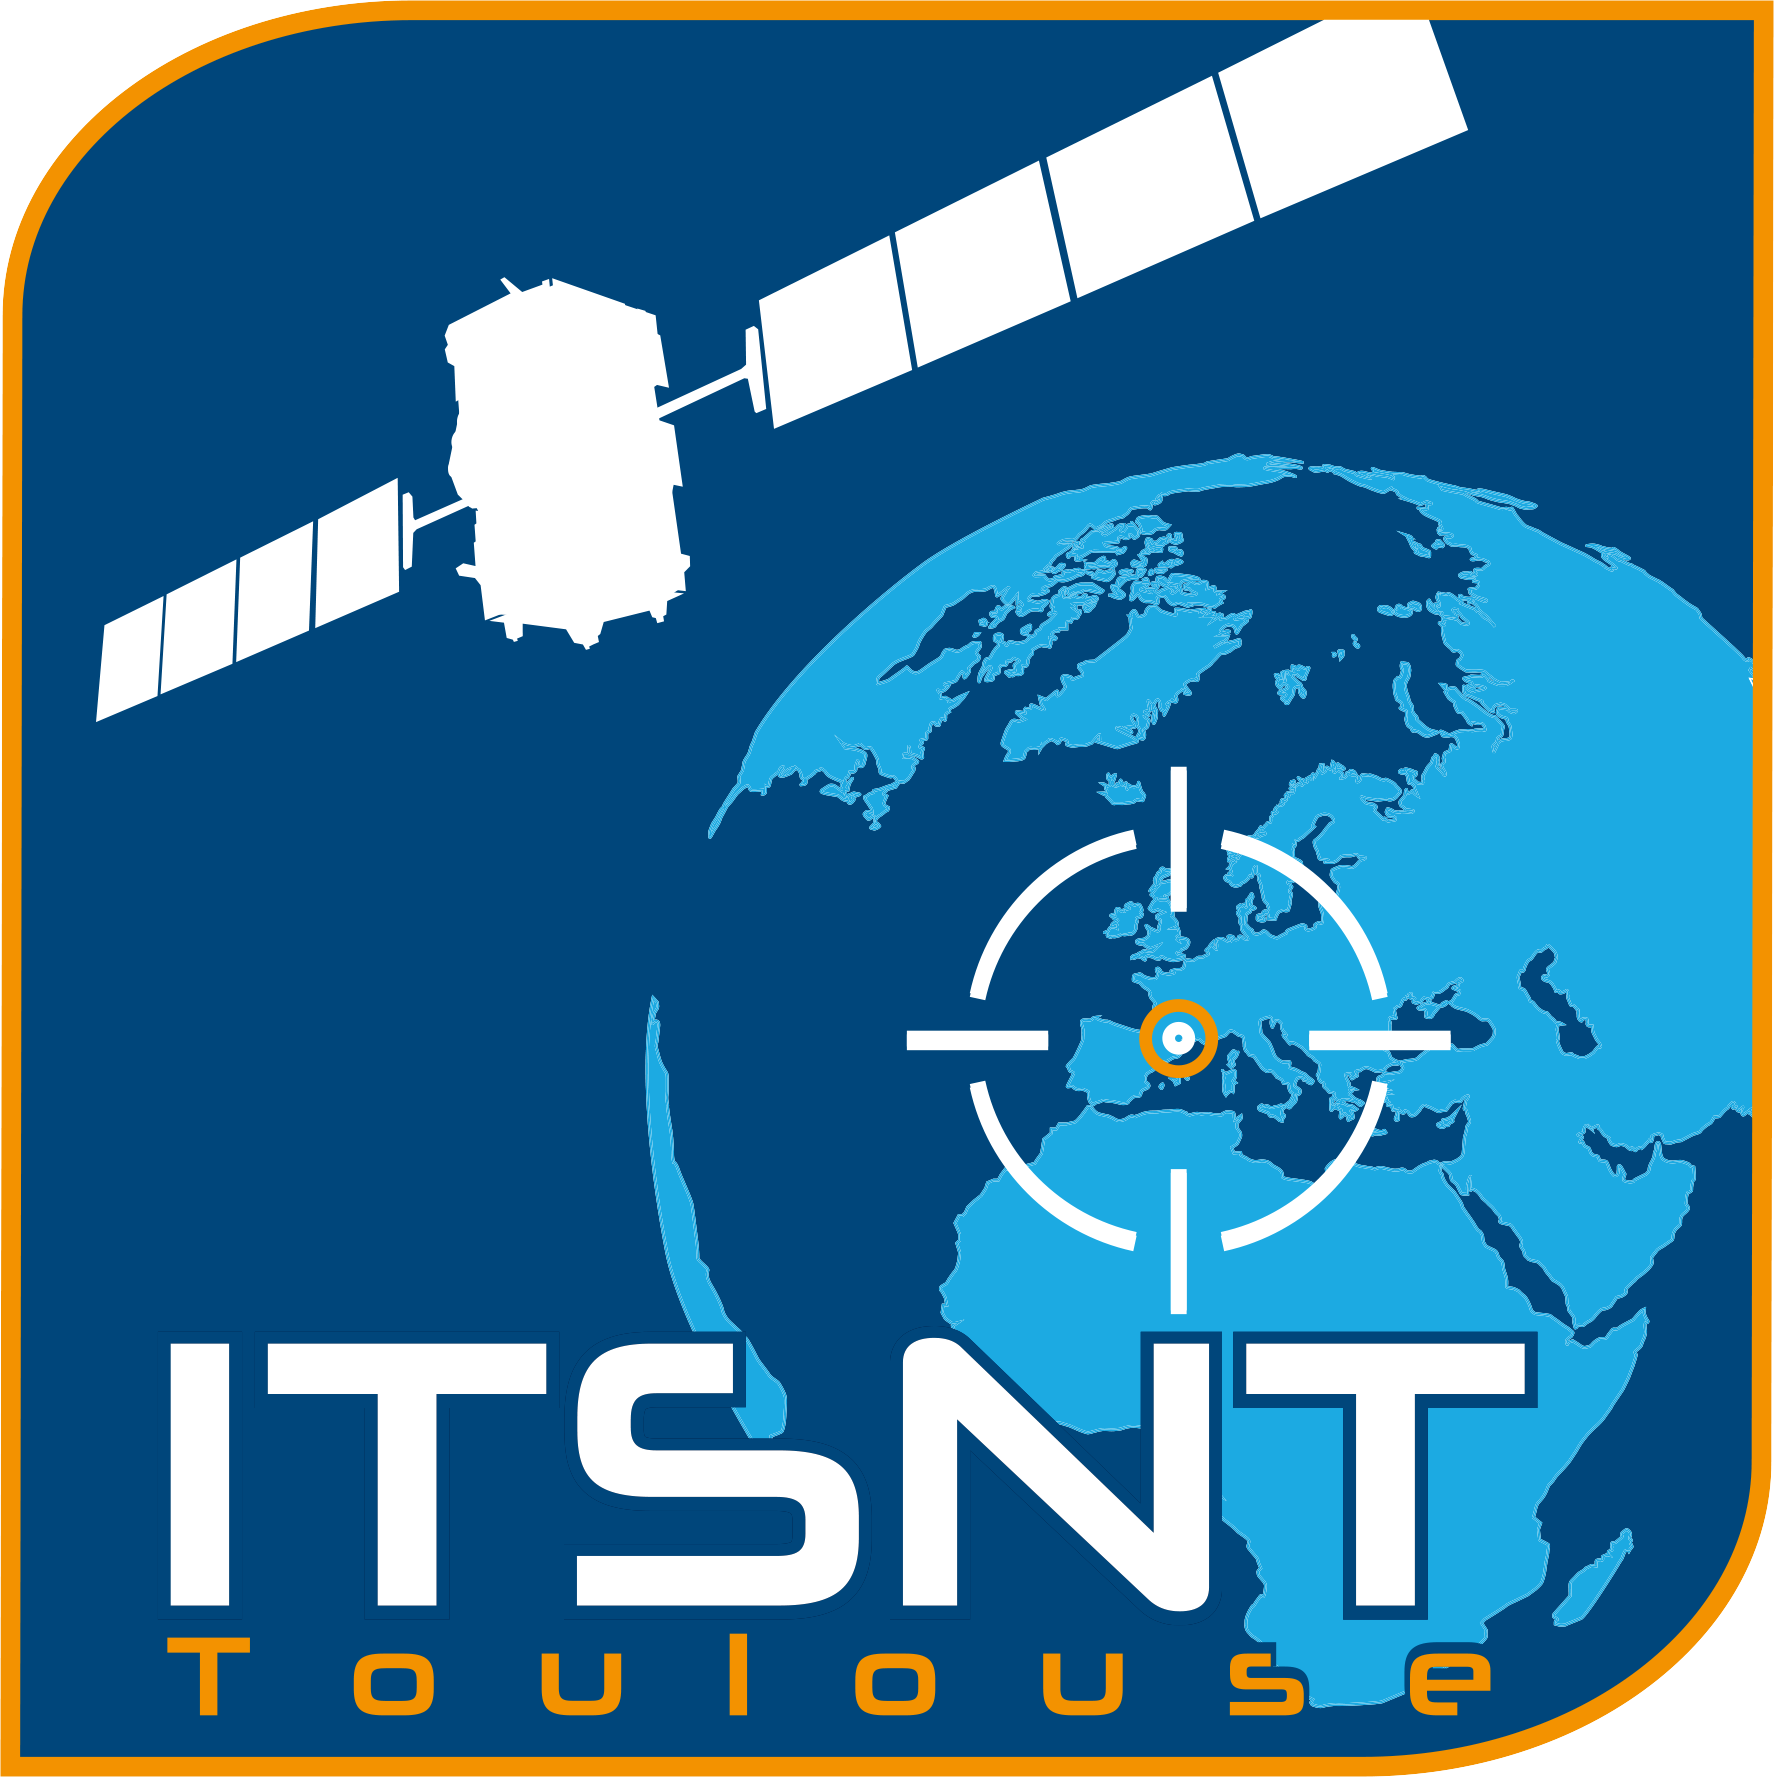 International Technical Symposium on Navigation and Timing Held This Week in Toulouse, France